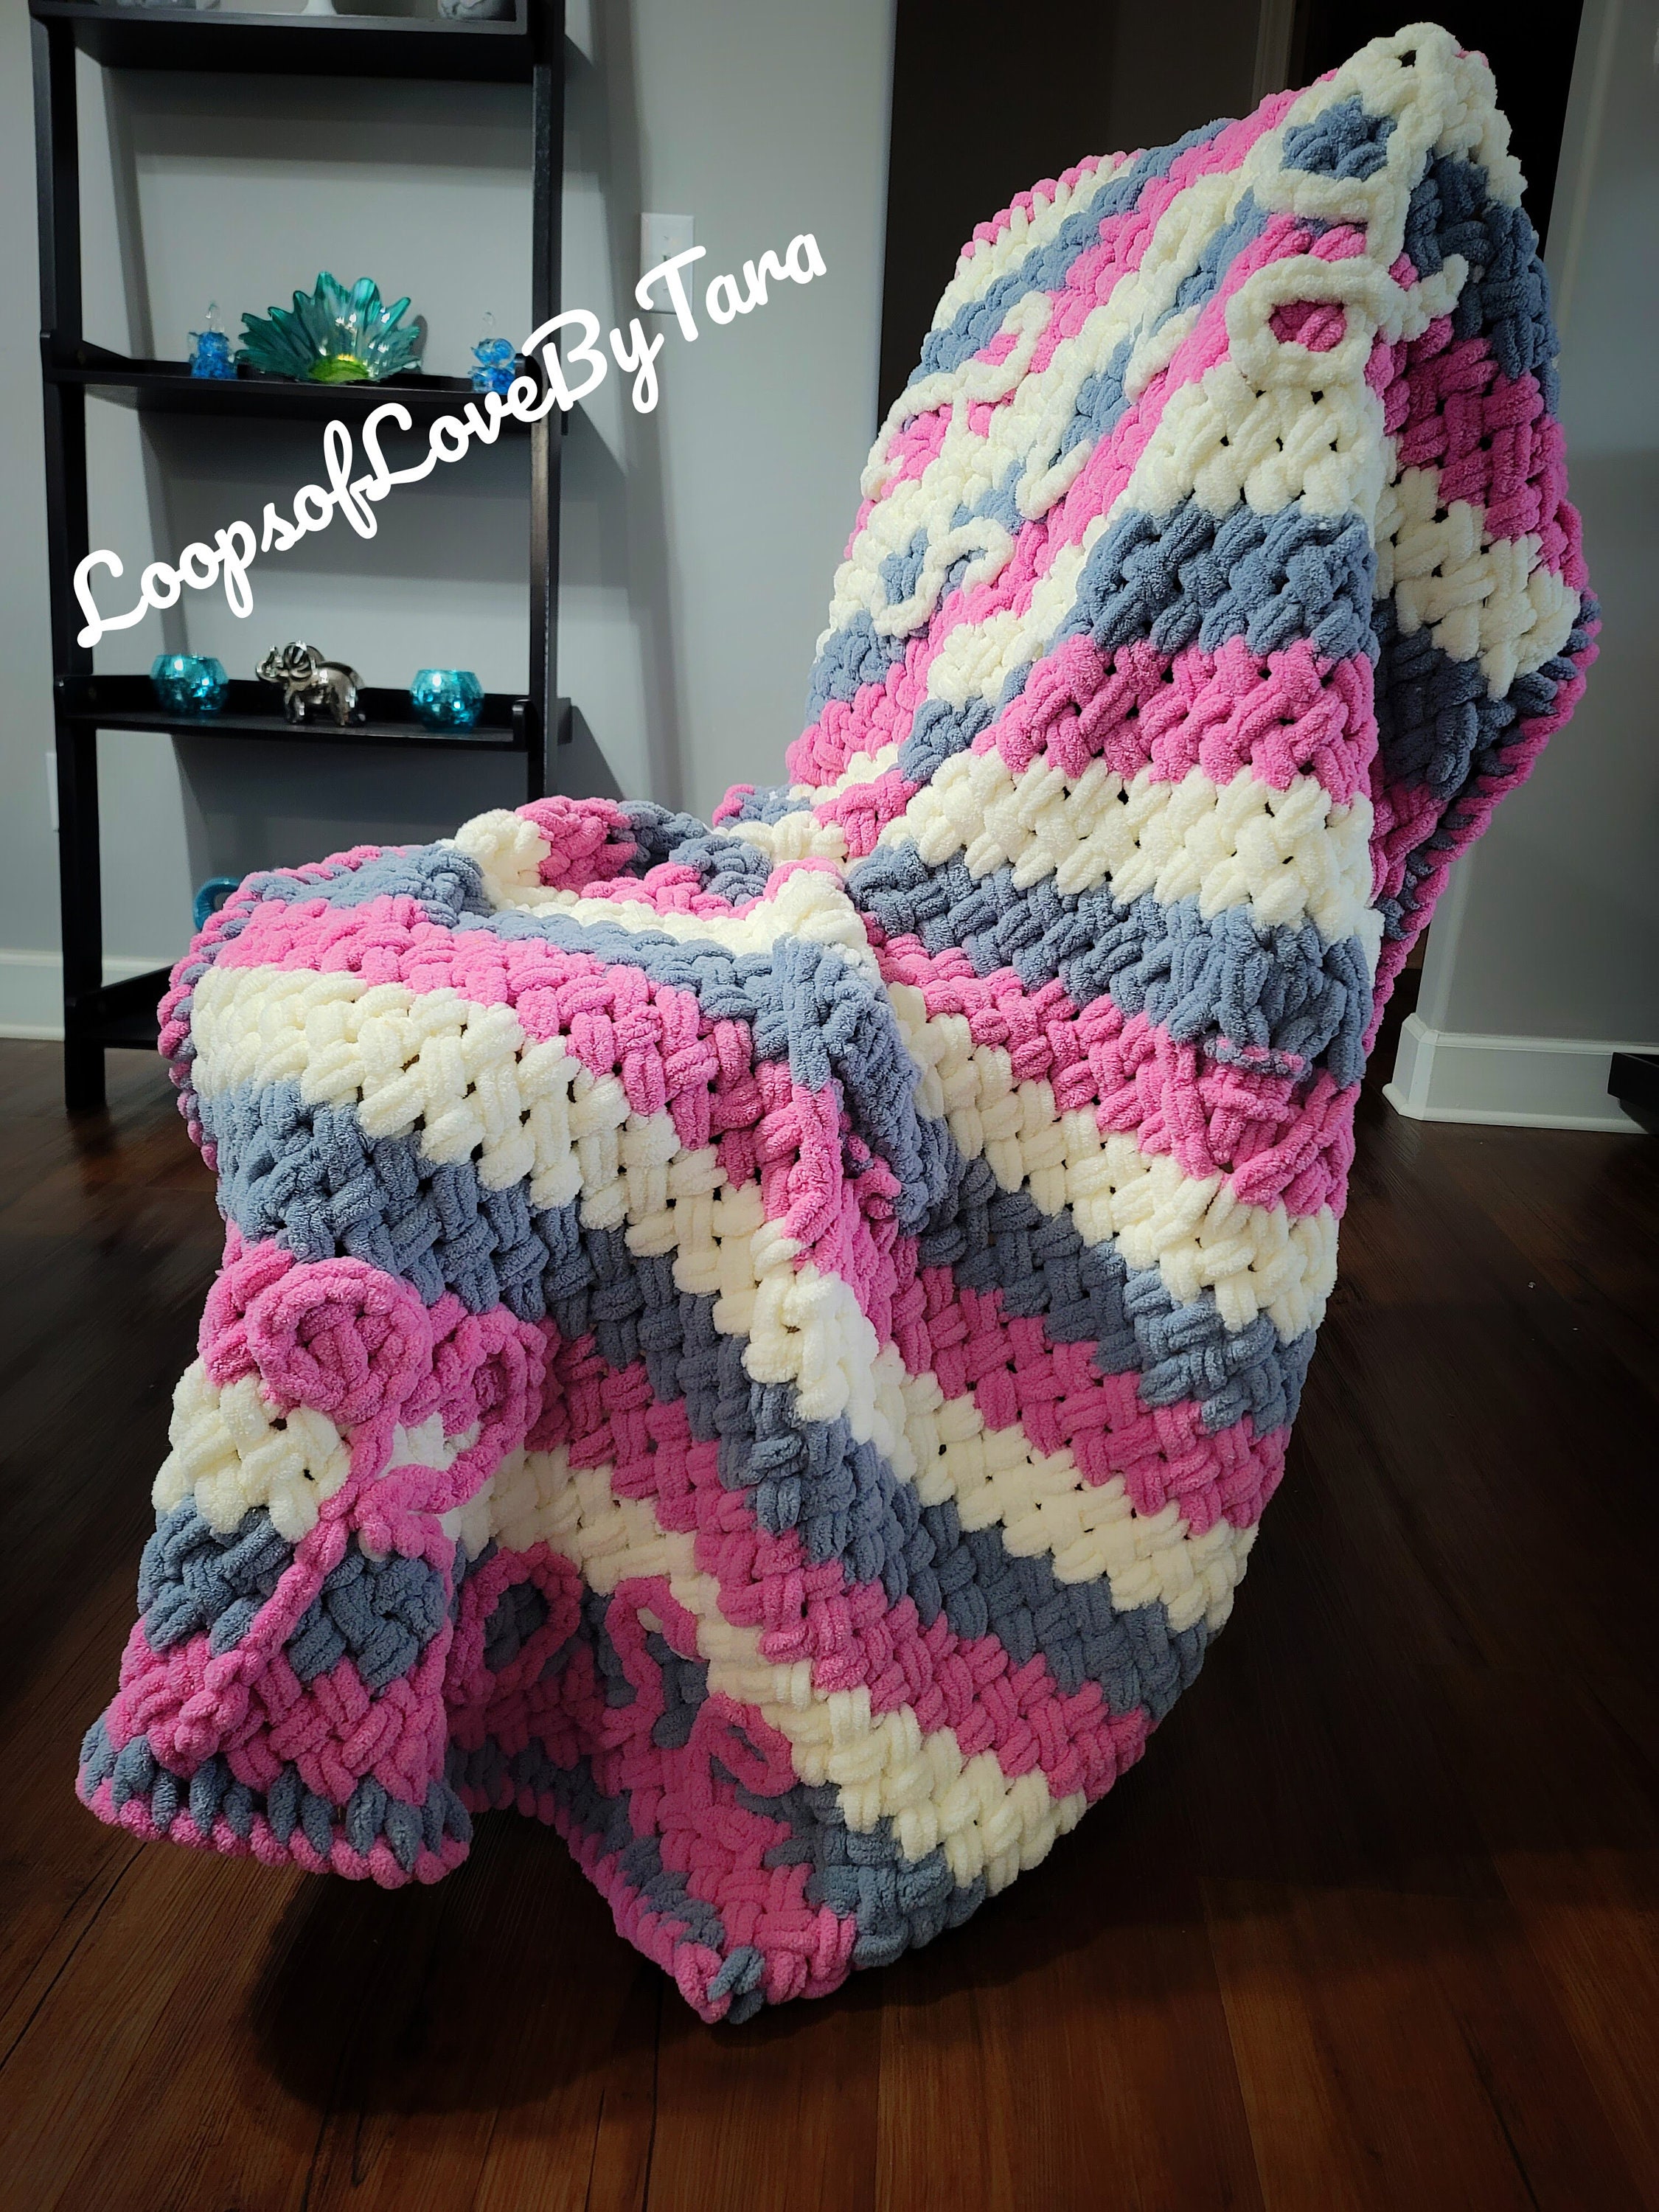 Chenille Baby Blanket, Chunky Knit Baby Blanket, Loop Yarn Blanket for  Baby, Soft Knit Baby Blanket, Chenille Bedding, Baby Arrival Gift 